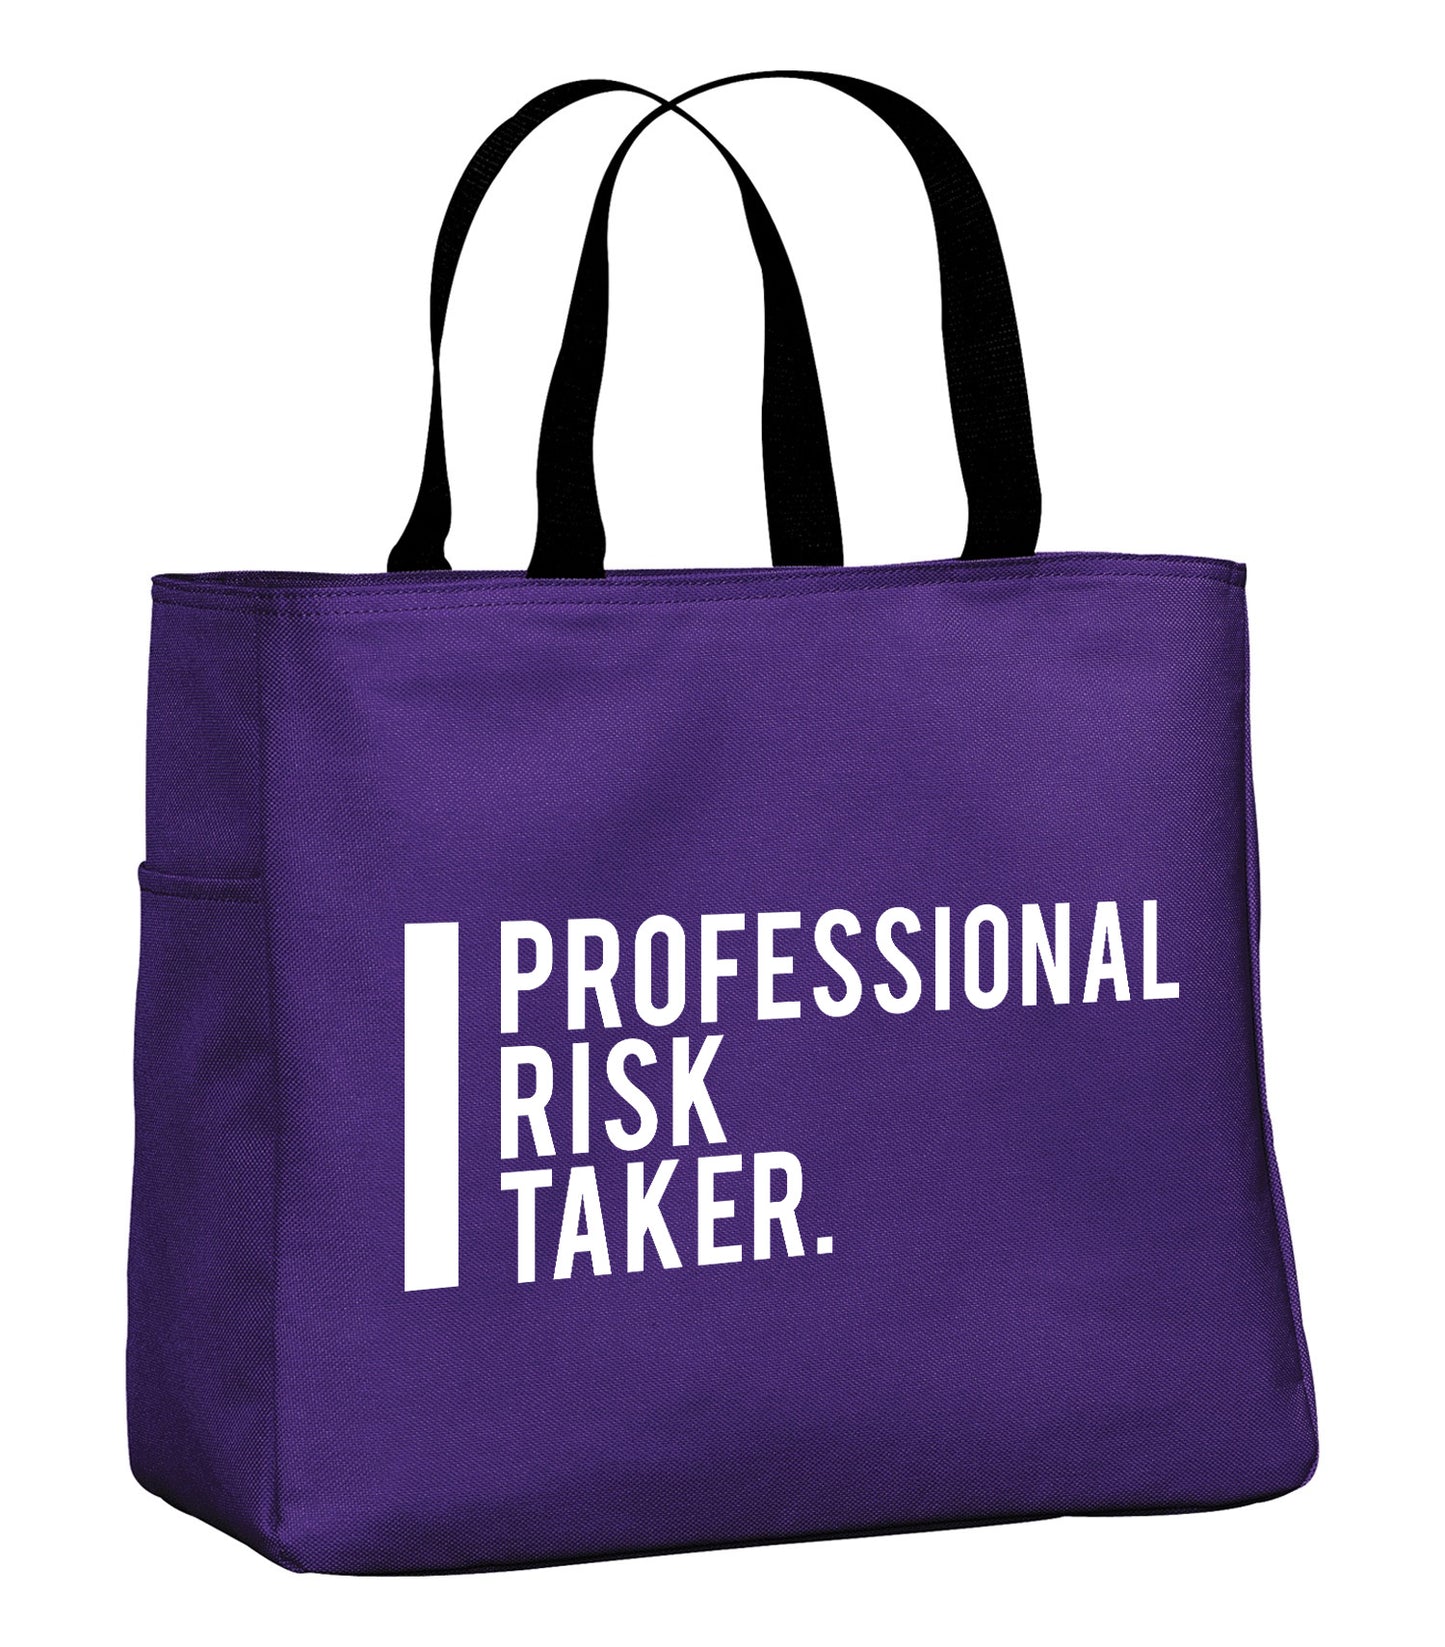 Project BOSS' "Professional Risk Taker" Tote Bag